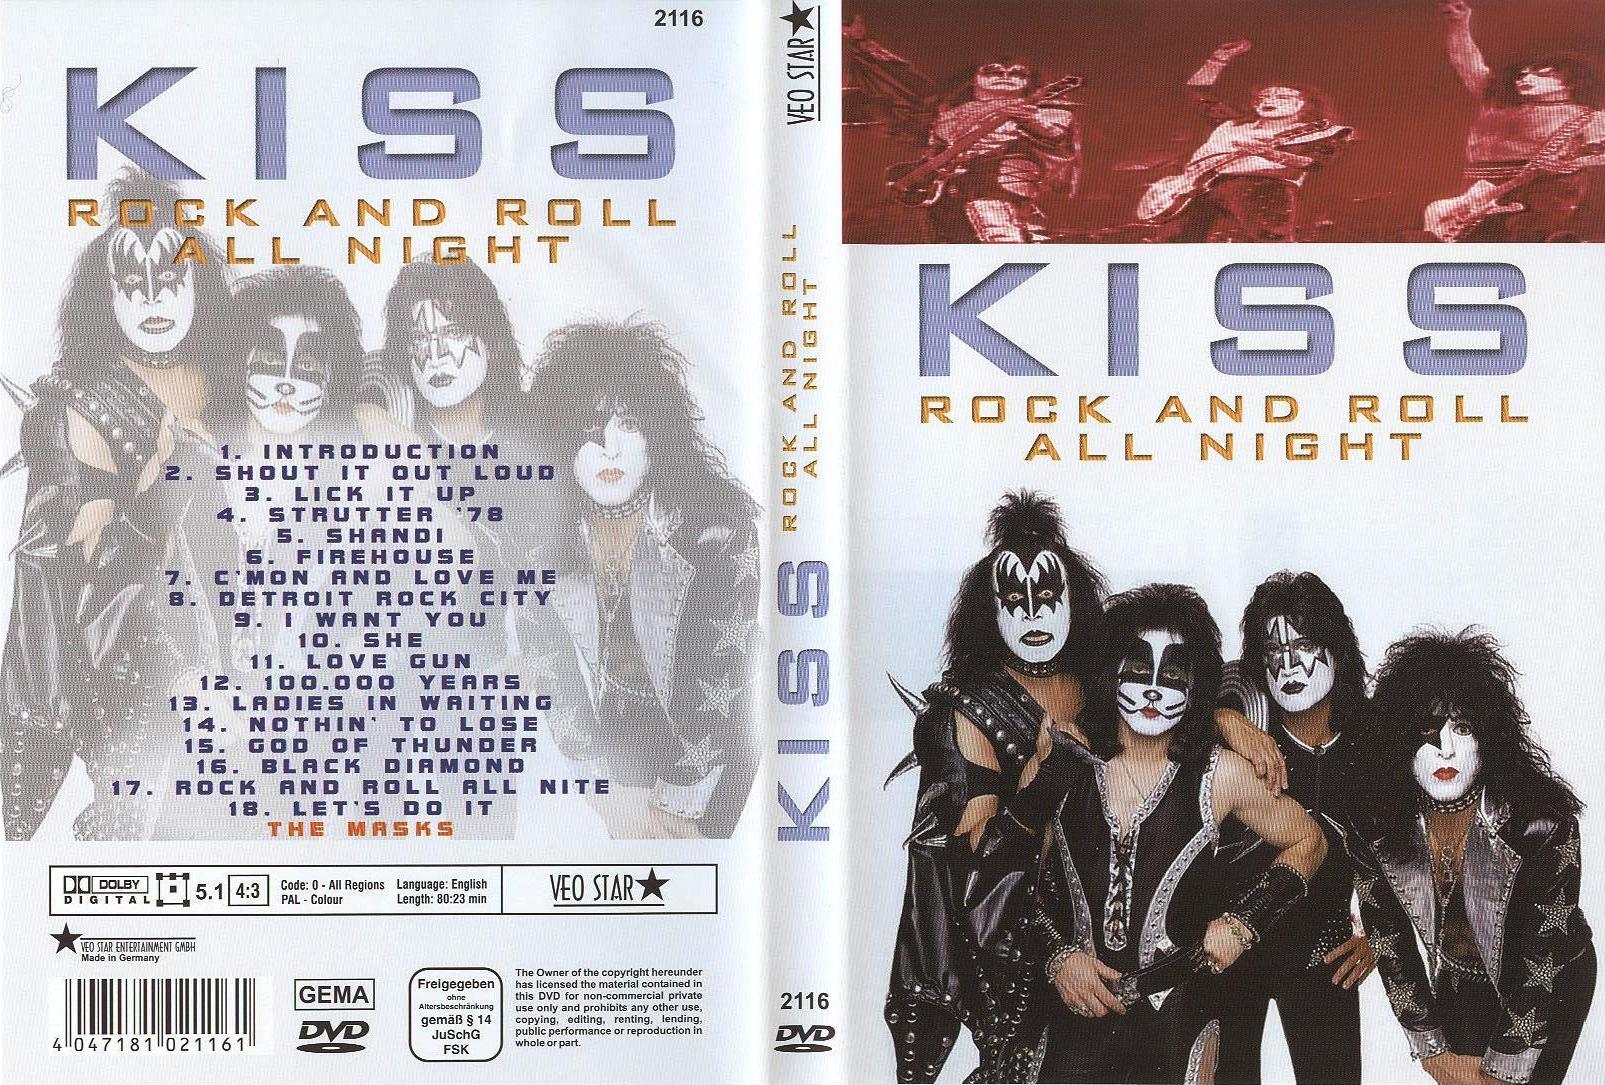 Jaquette DVD KISS - Rock and roll all night